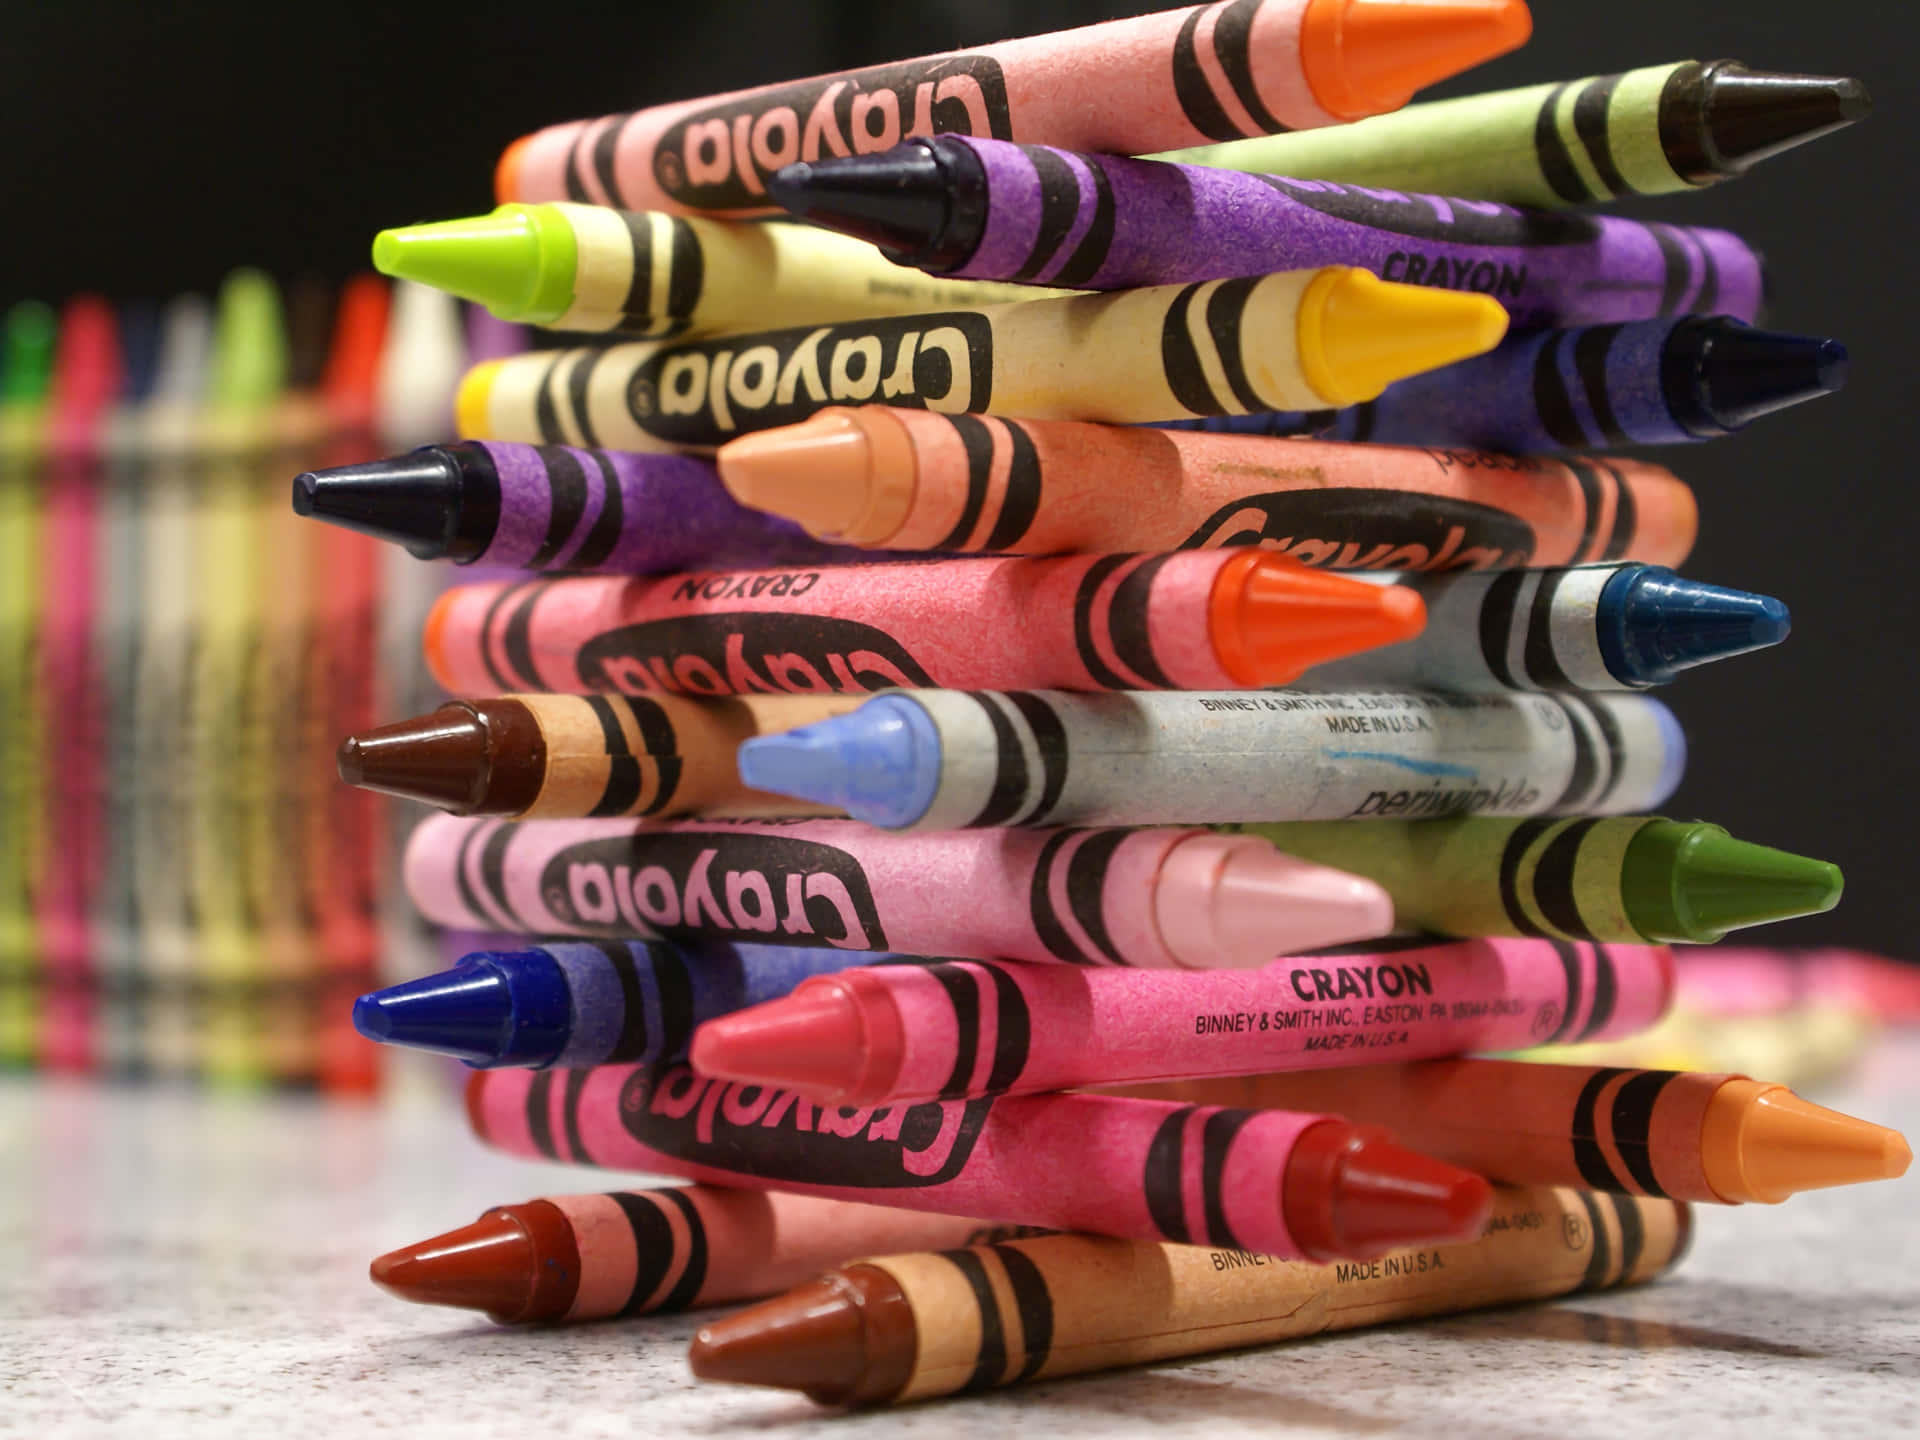 Colorful Crayons Creatively Arranged